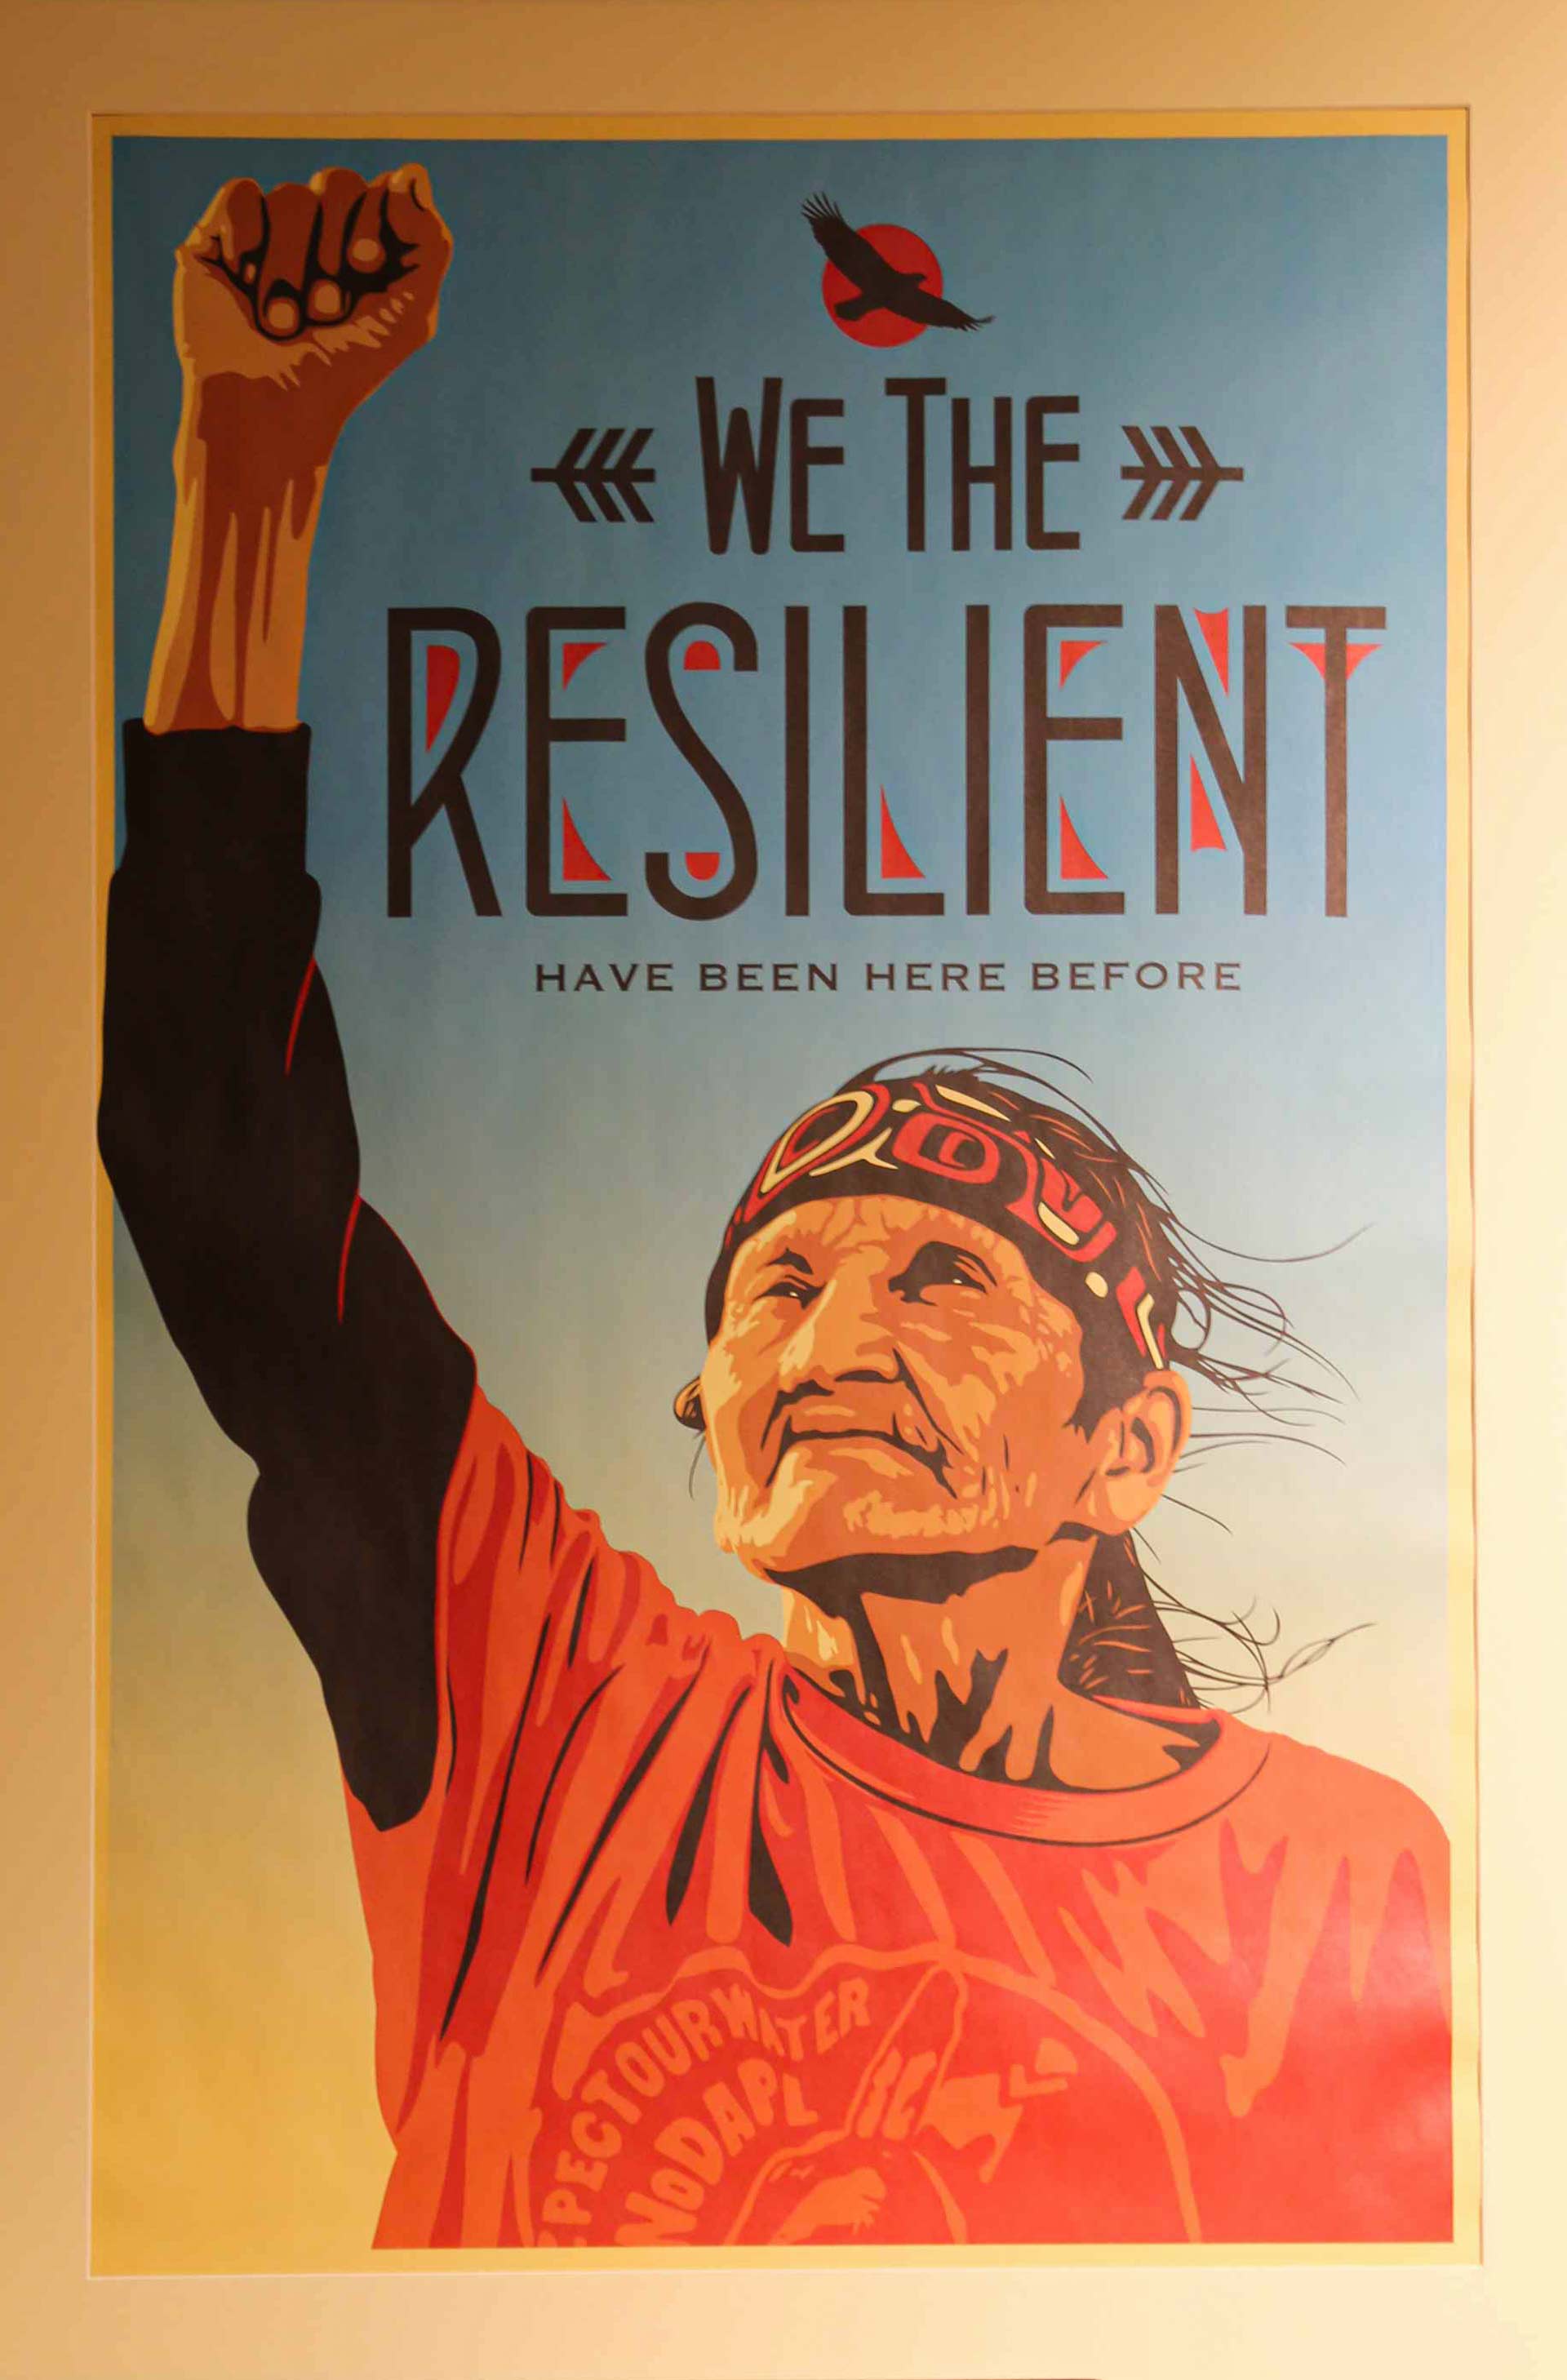 poster of a Native American with his fist up